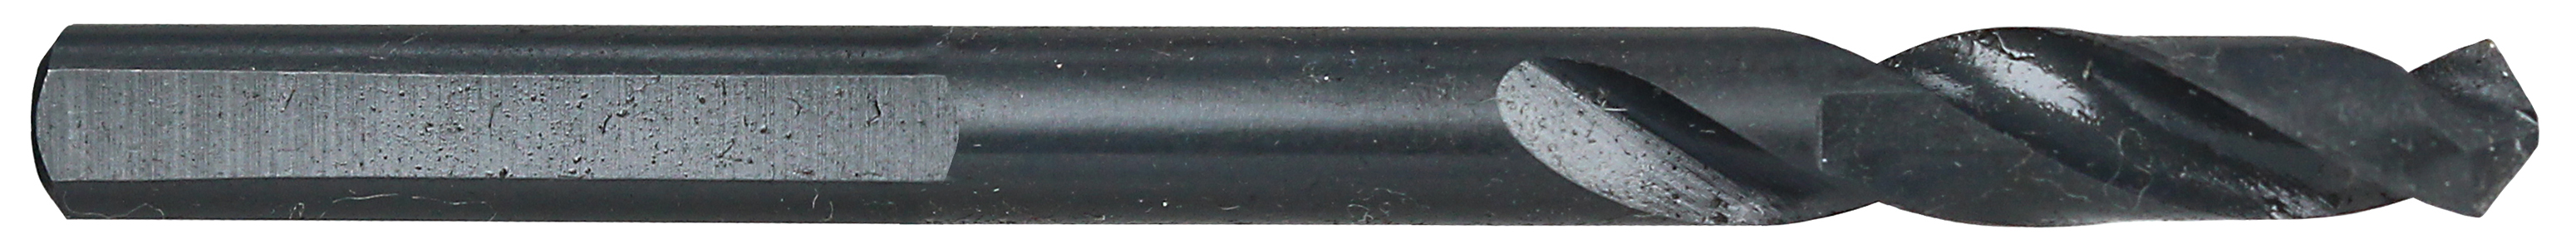 Pilot Drill, 1/4 in. bit diameter, 4-/12 in. overall length, 3 flutes, Shank Ground 3 Sides